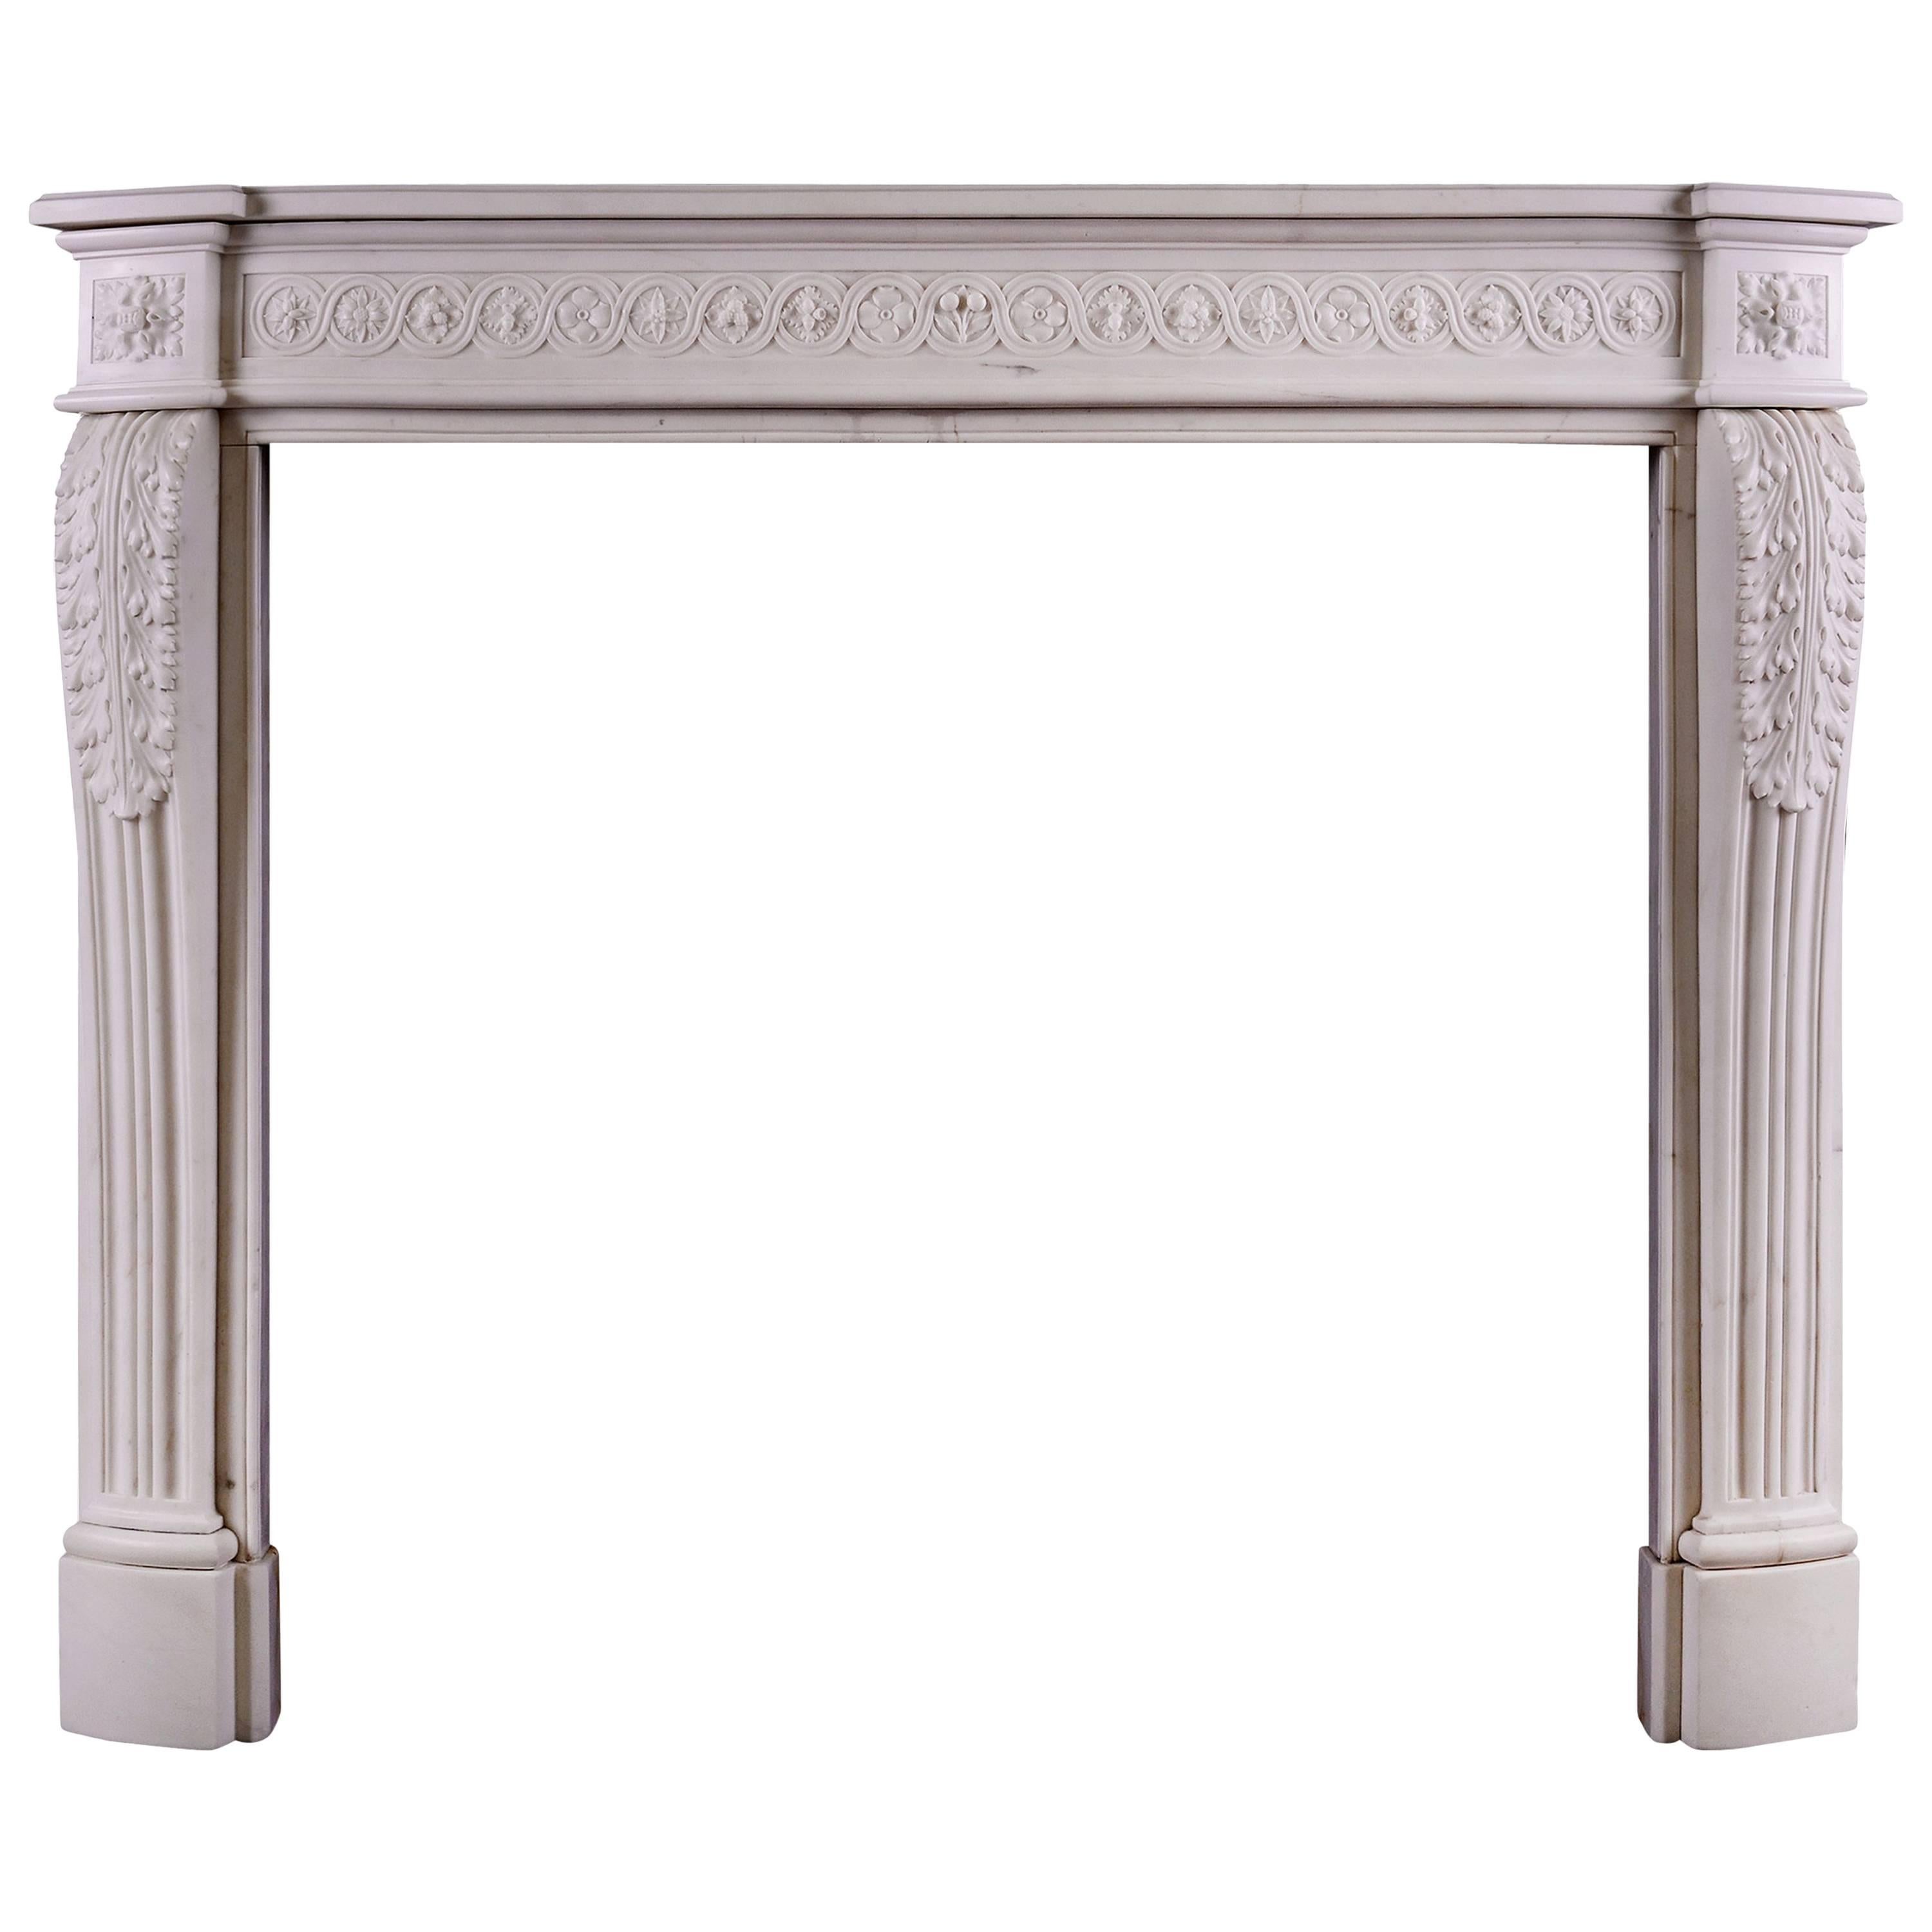 Carved French Fireplace with Guilloche Frieze For Sale